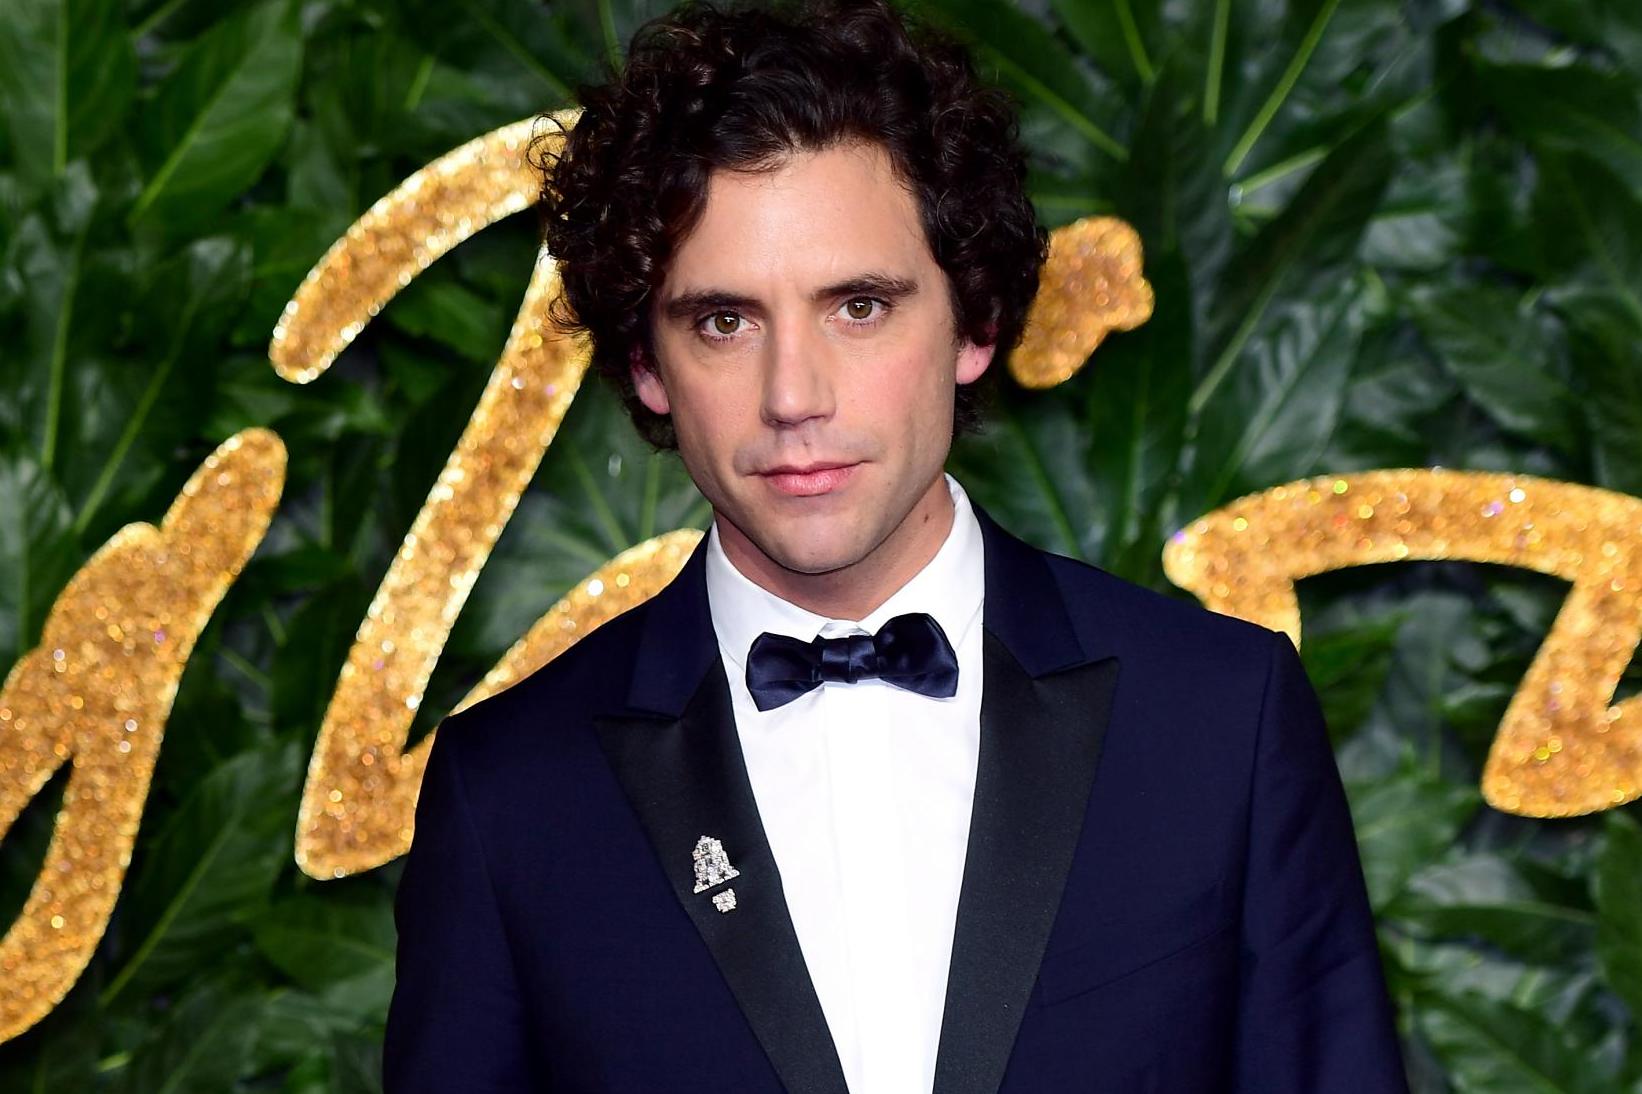 Mika announces new album 'My Name is Michael Holbrook' as he unveils